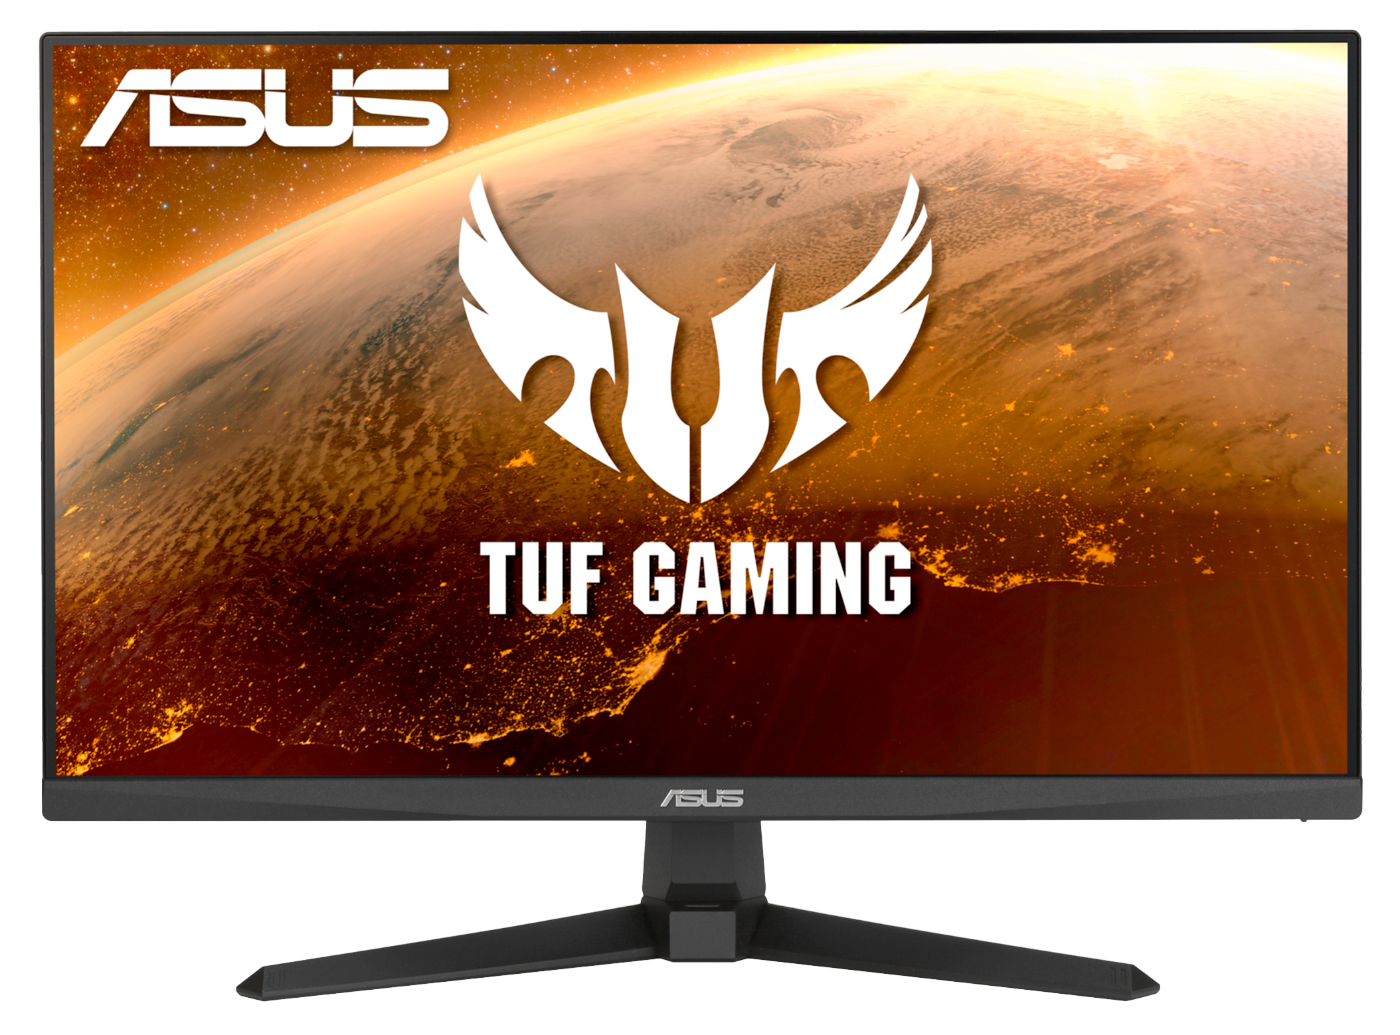 Gaming ms VG249Q1A Reaktionszeit, Zoll Full-HD Monitor 165 Hz) 23,8 (1 TUF ASUS Gaming